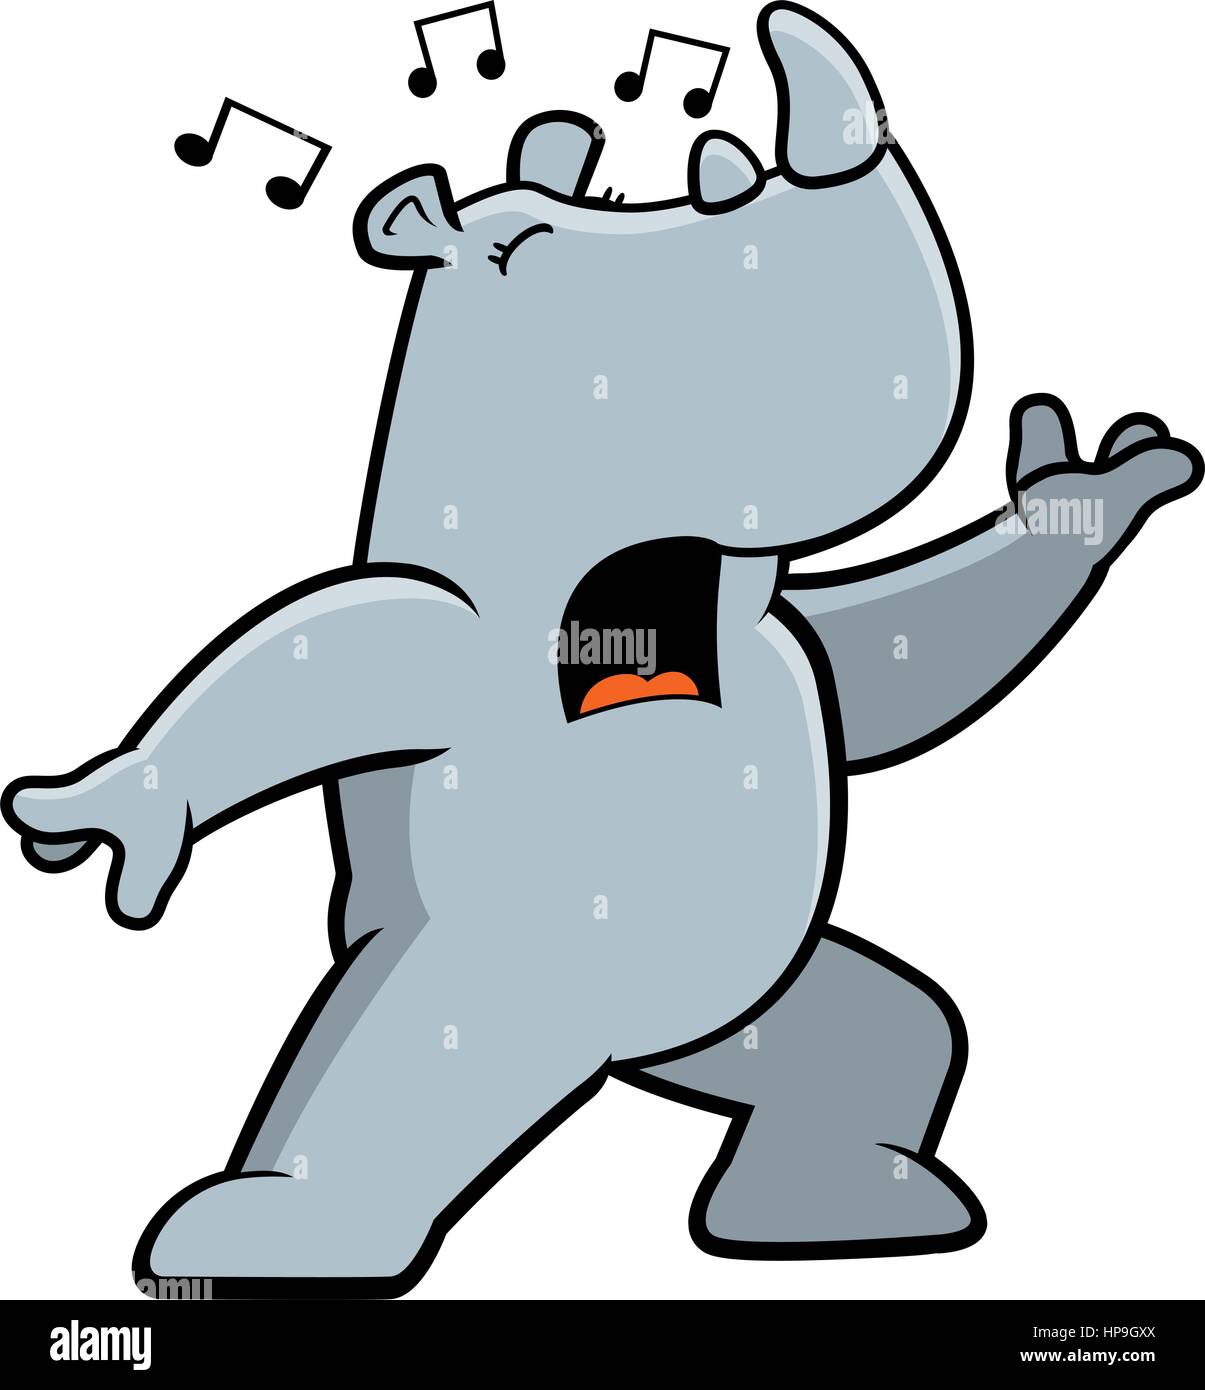 A cartoon rhino standing and singing a song. Stock Vector